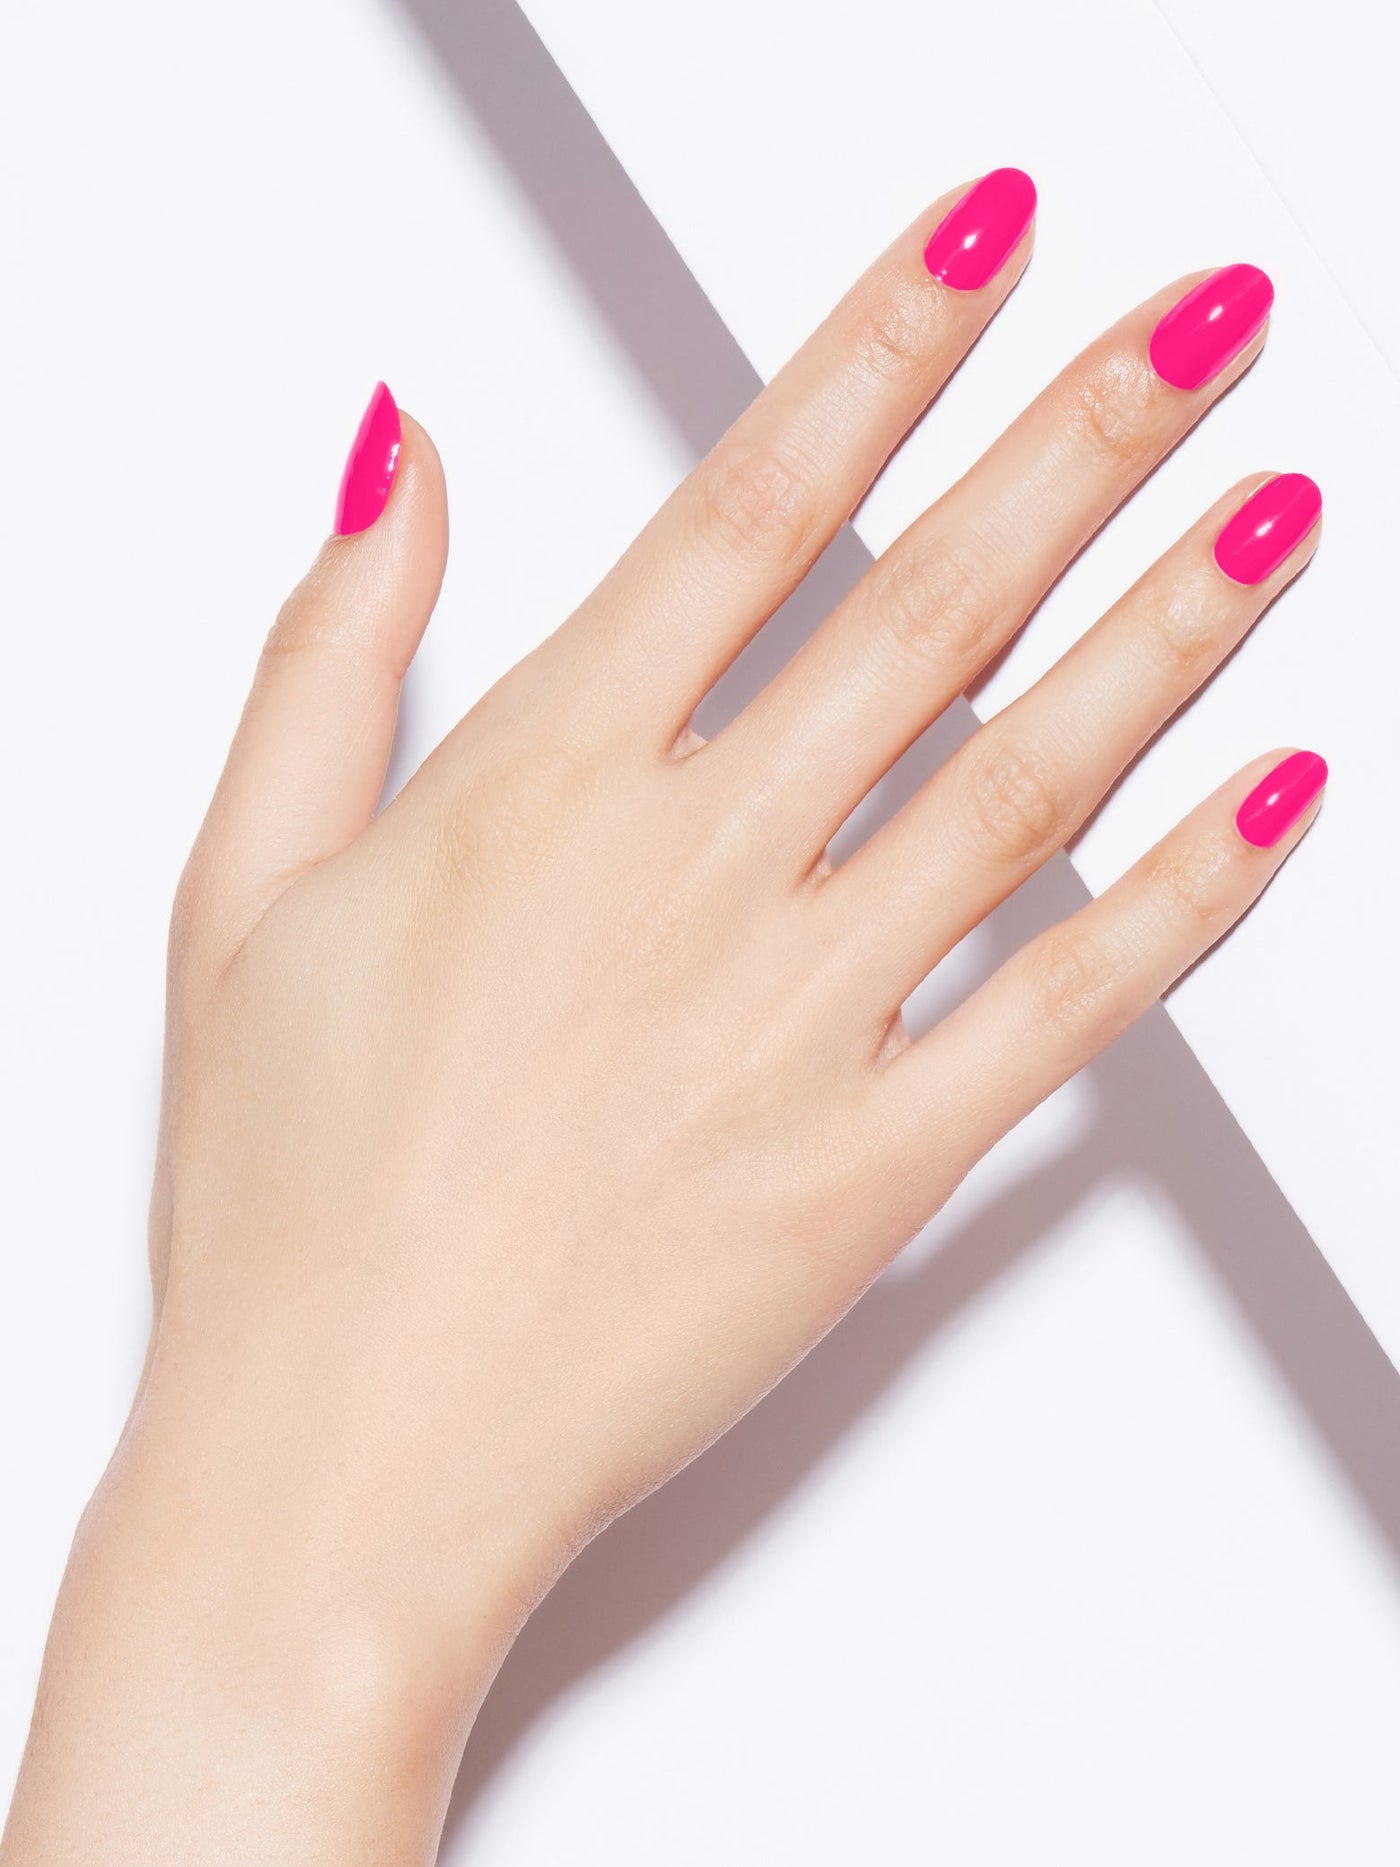 Full bodied neon pink, Full coverage, Light